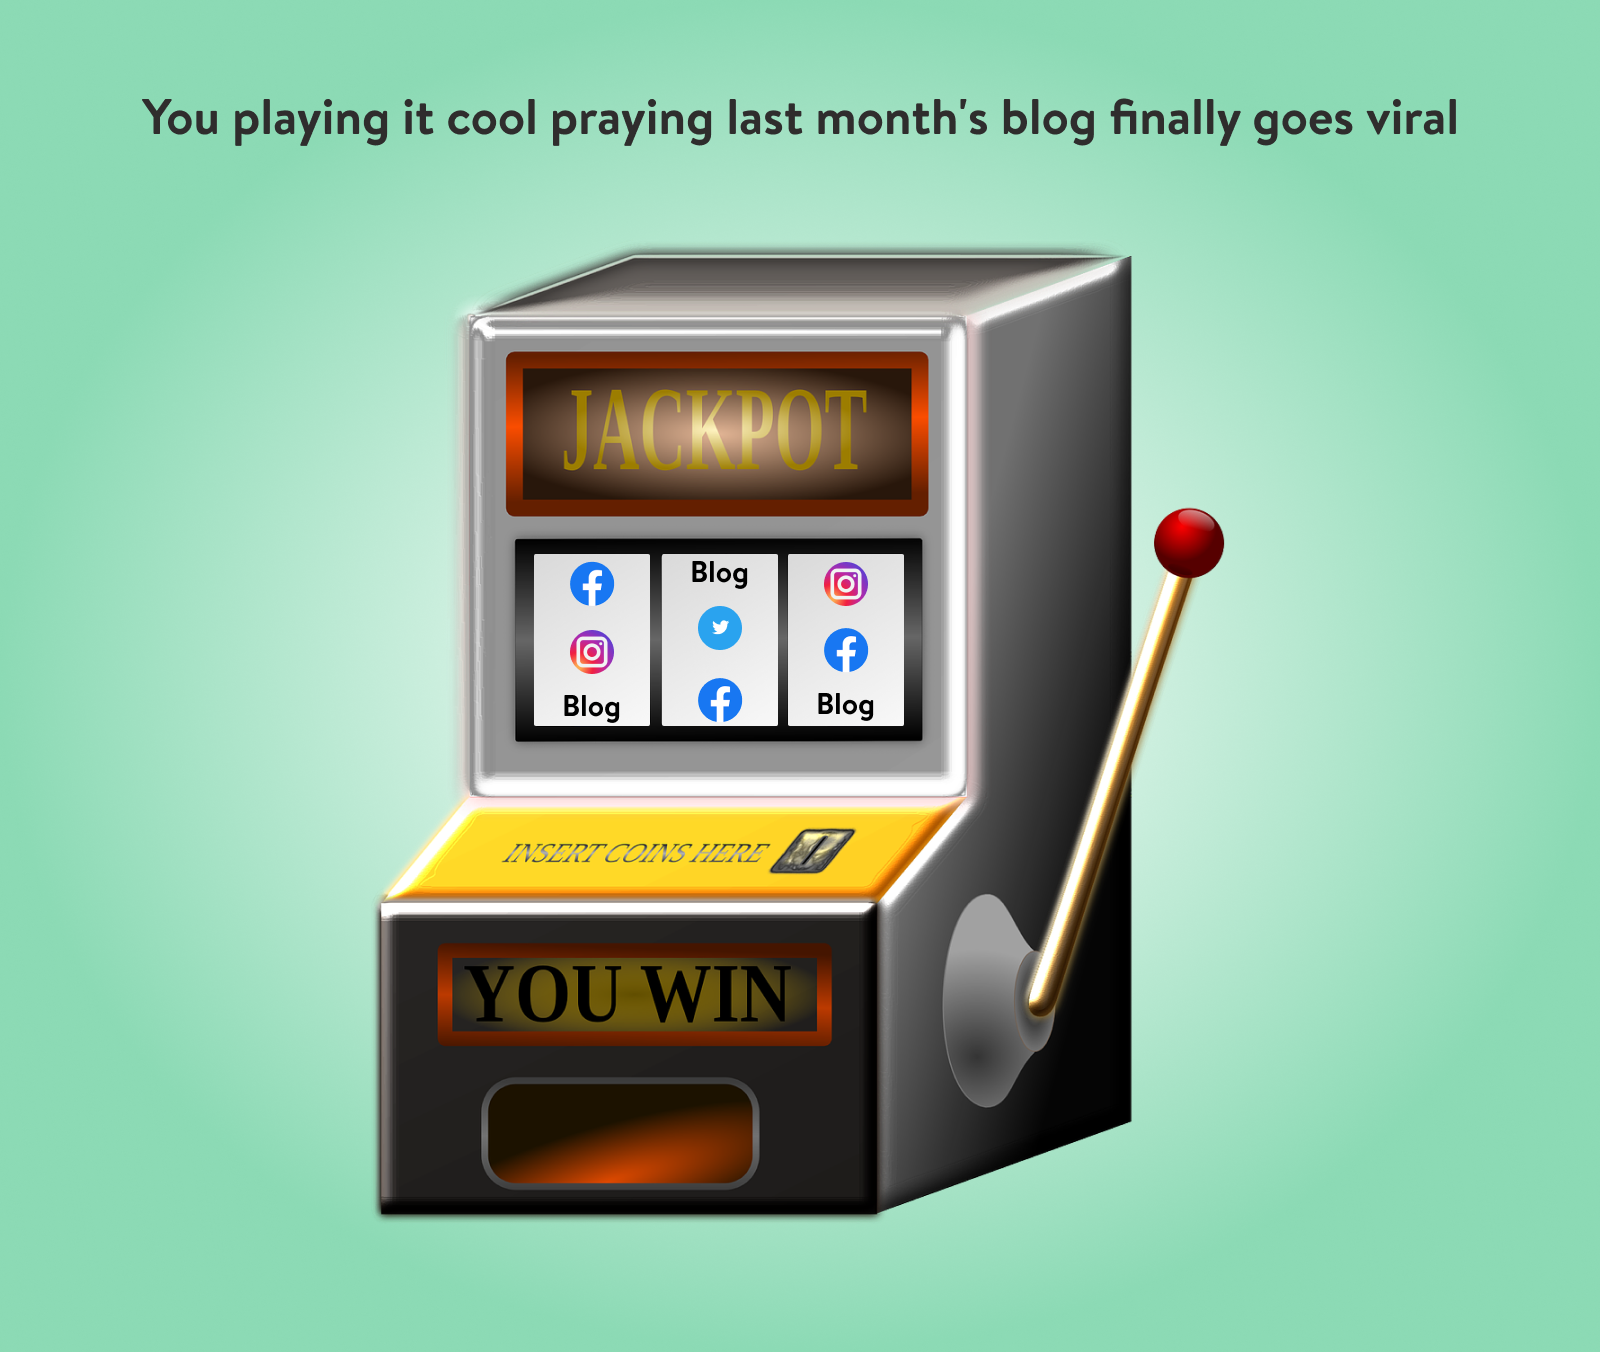 You playing it cool praying last month's blog finally goes viral